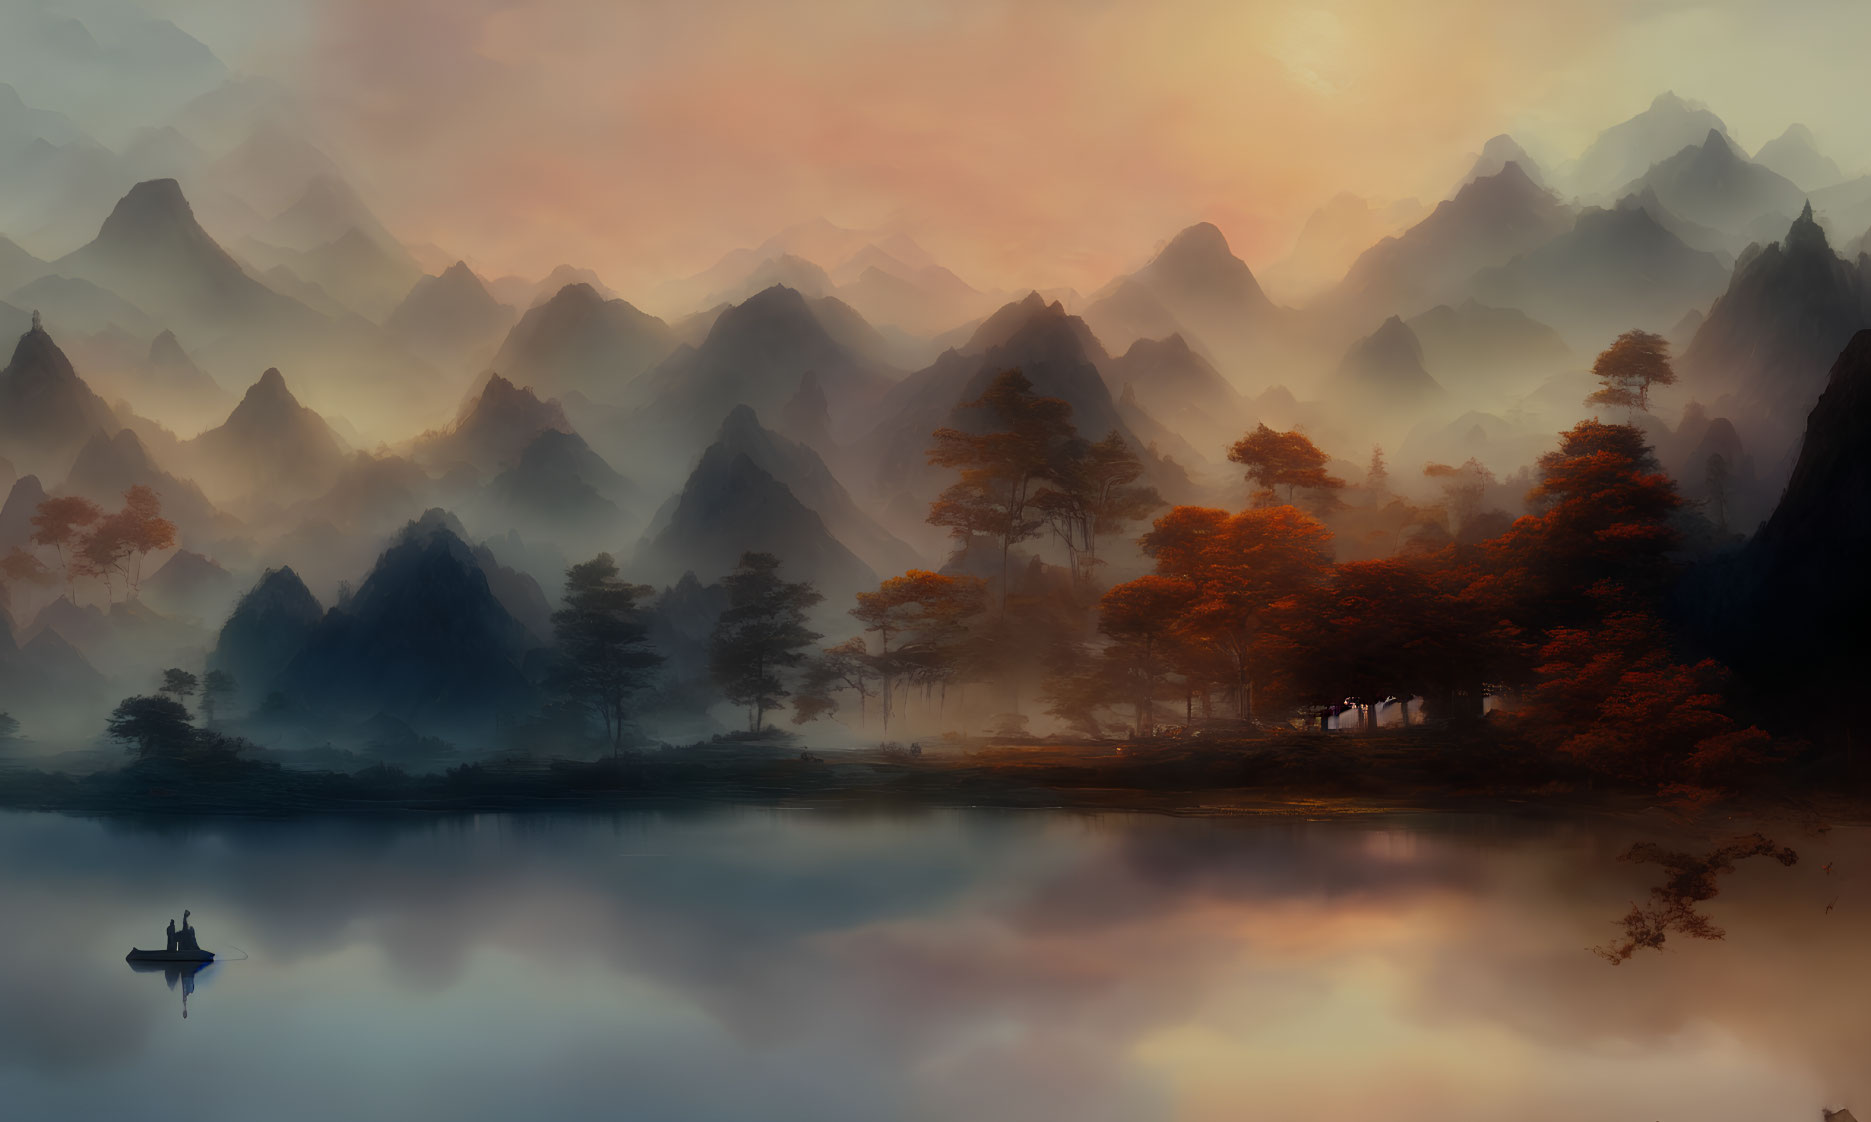 Misty Mountain Landscape with Reflective Lake at Dawn